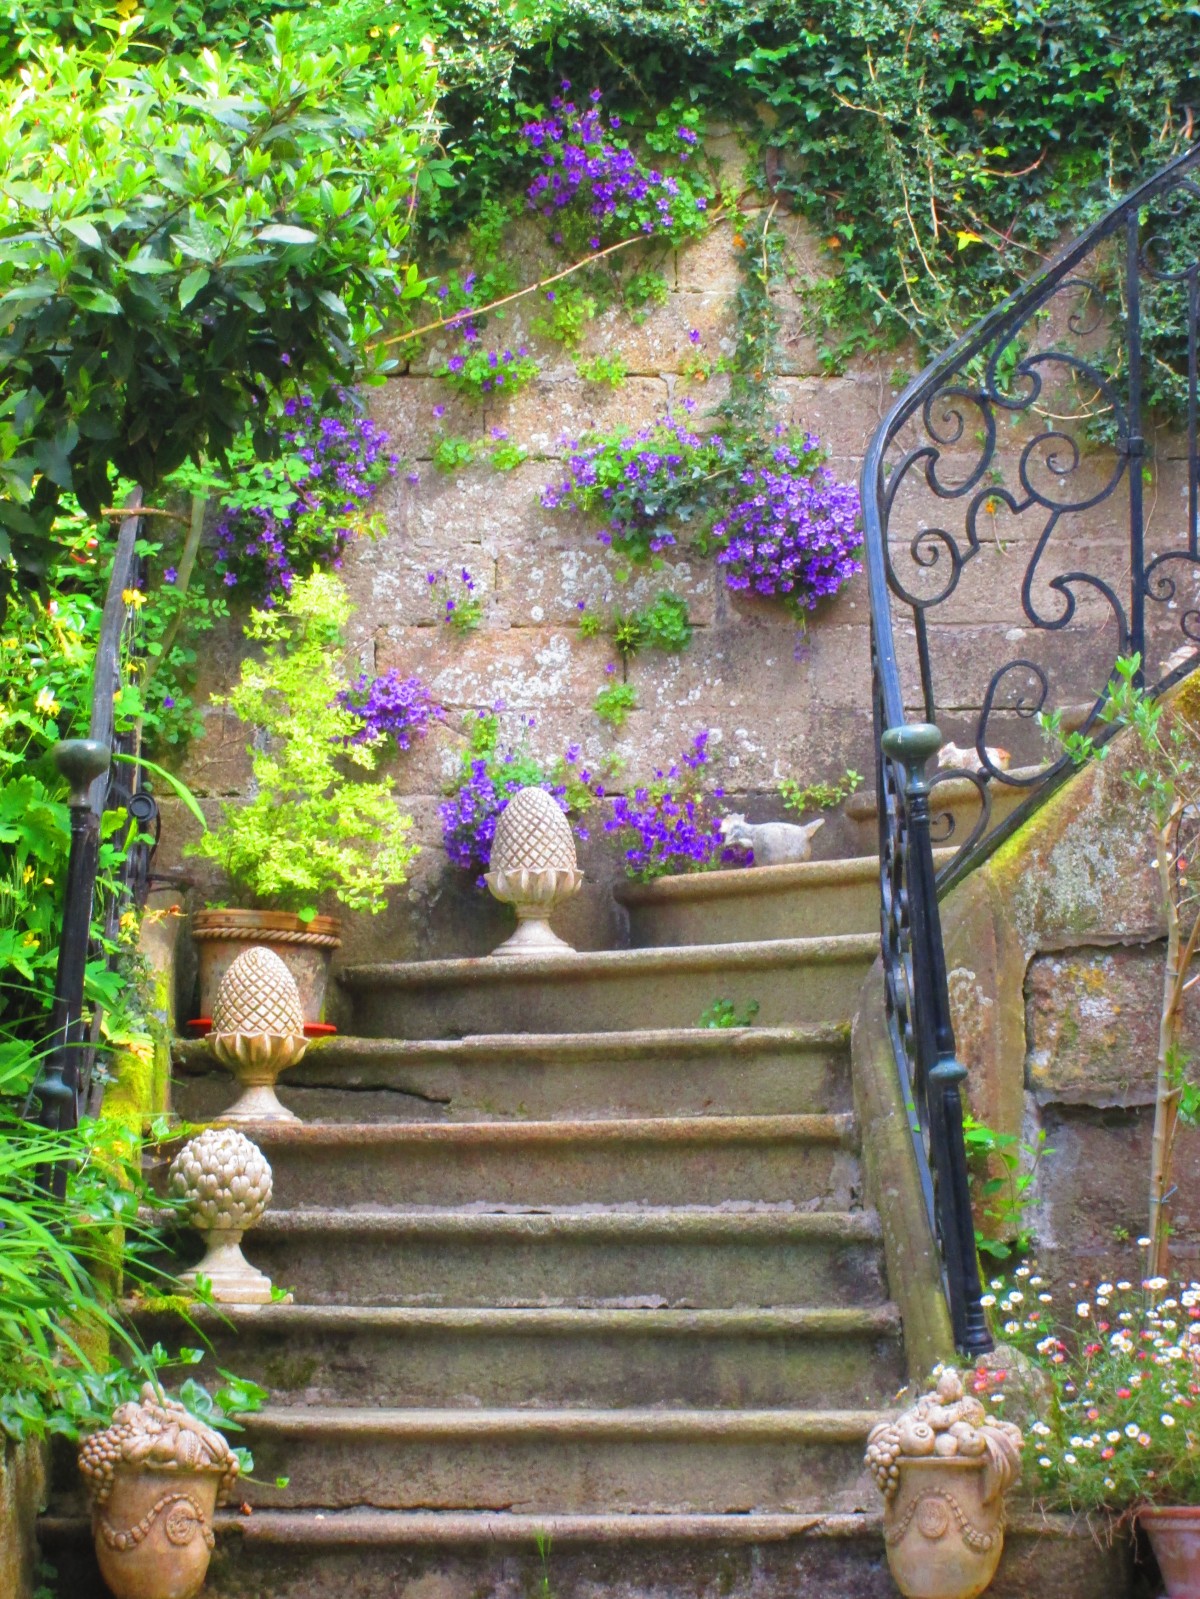 Steps with pots